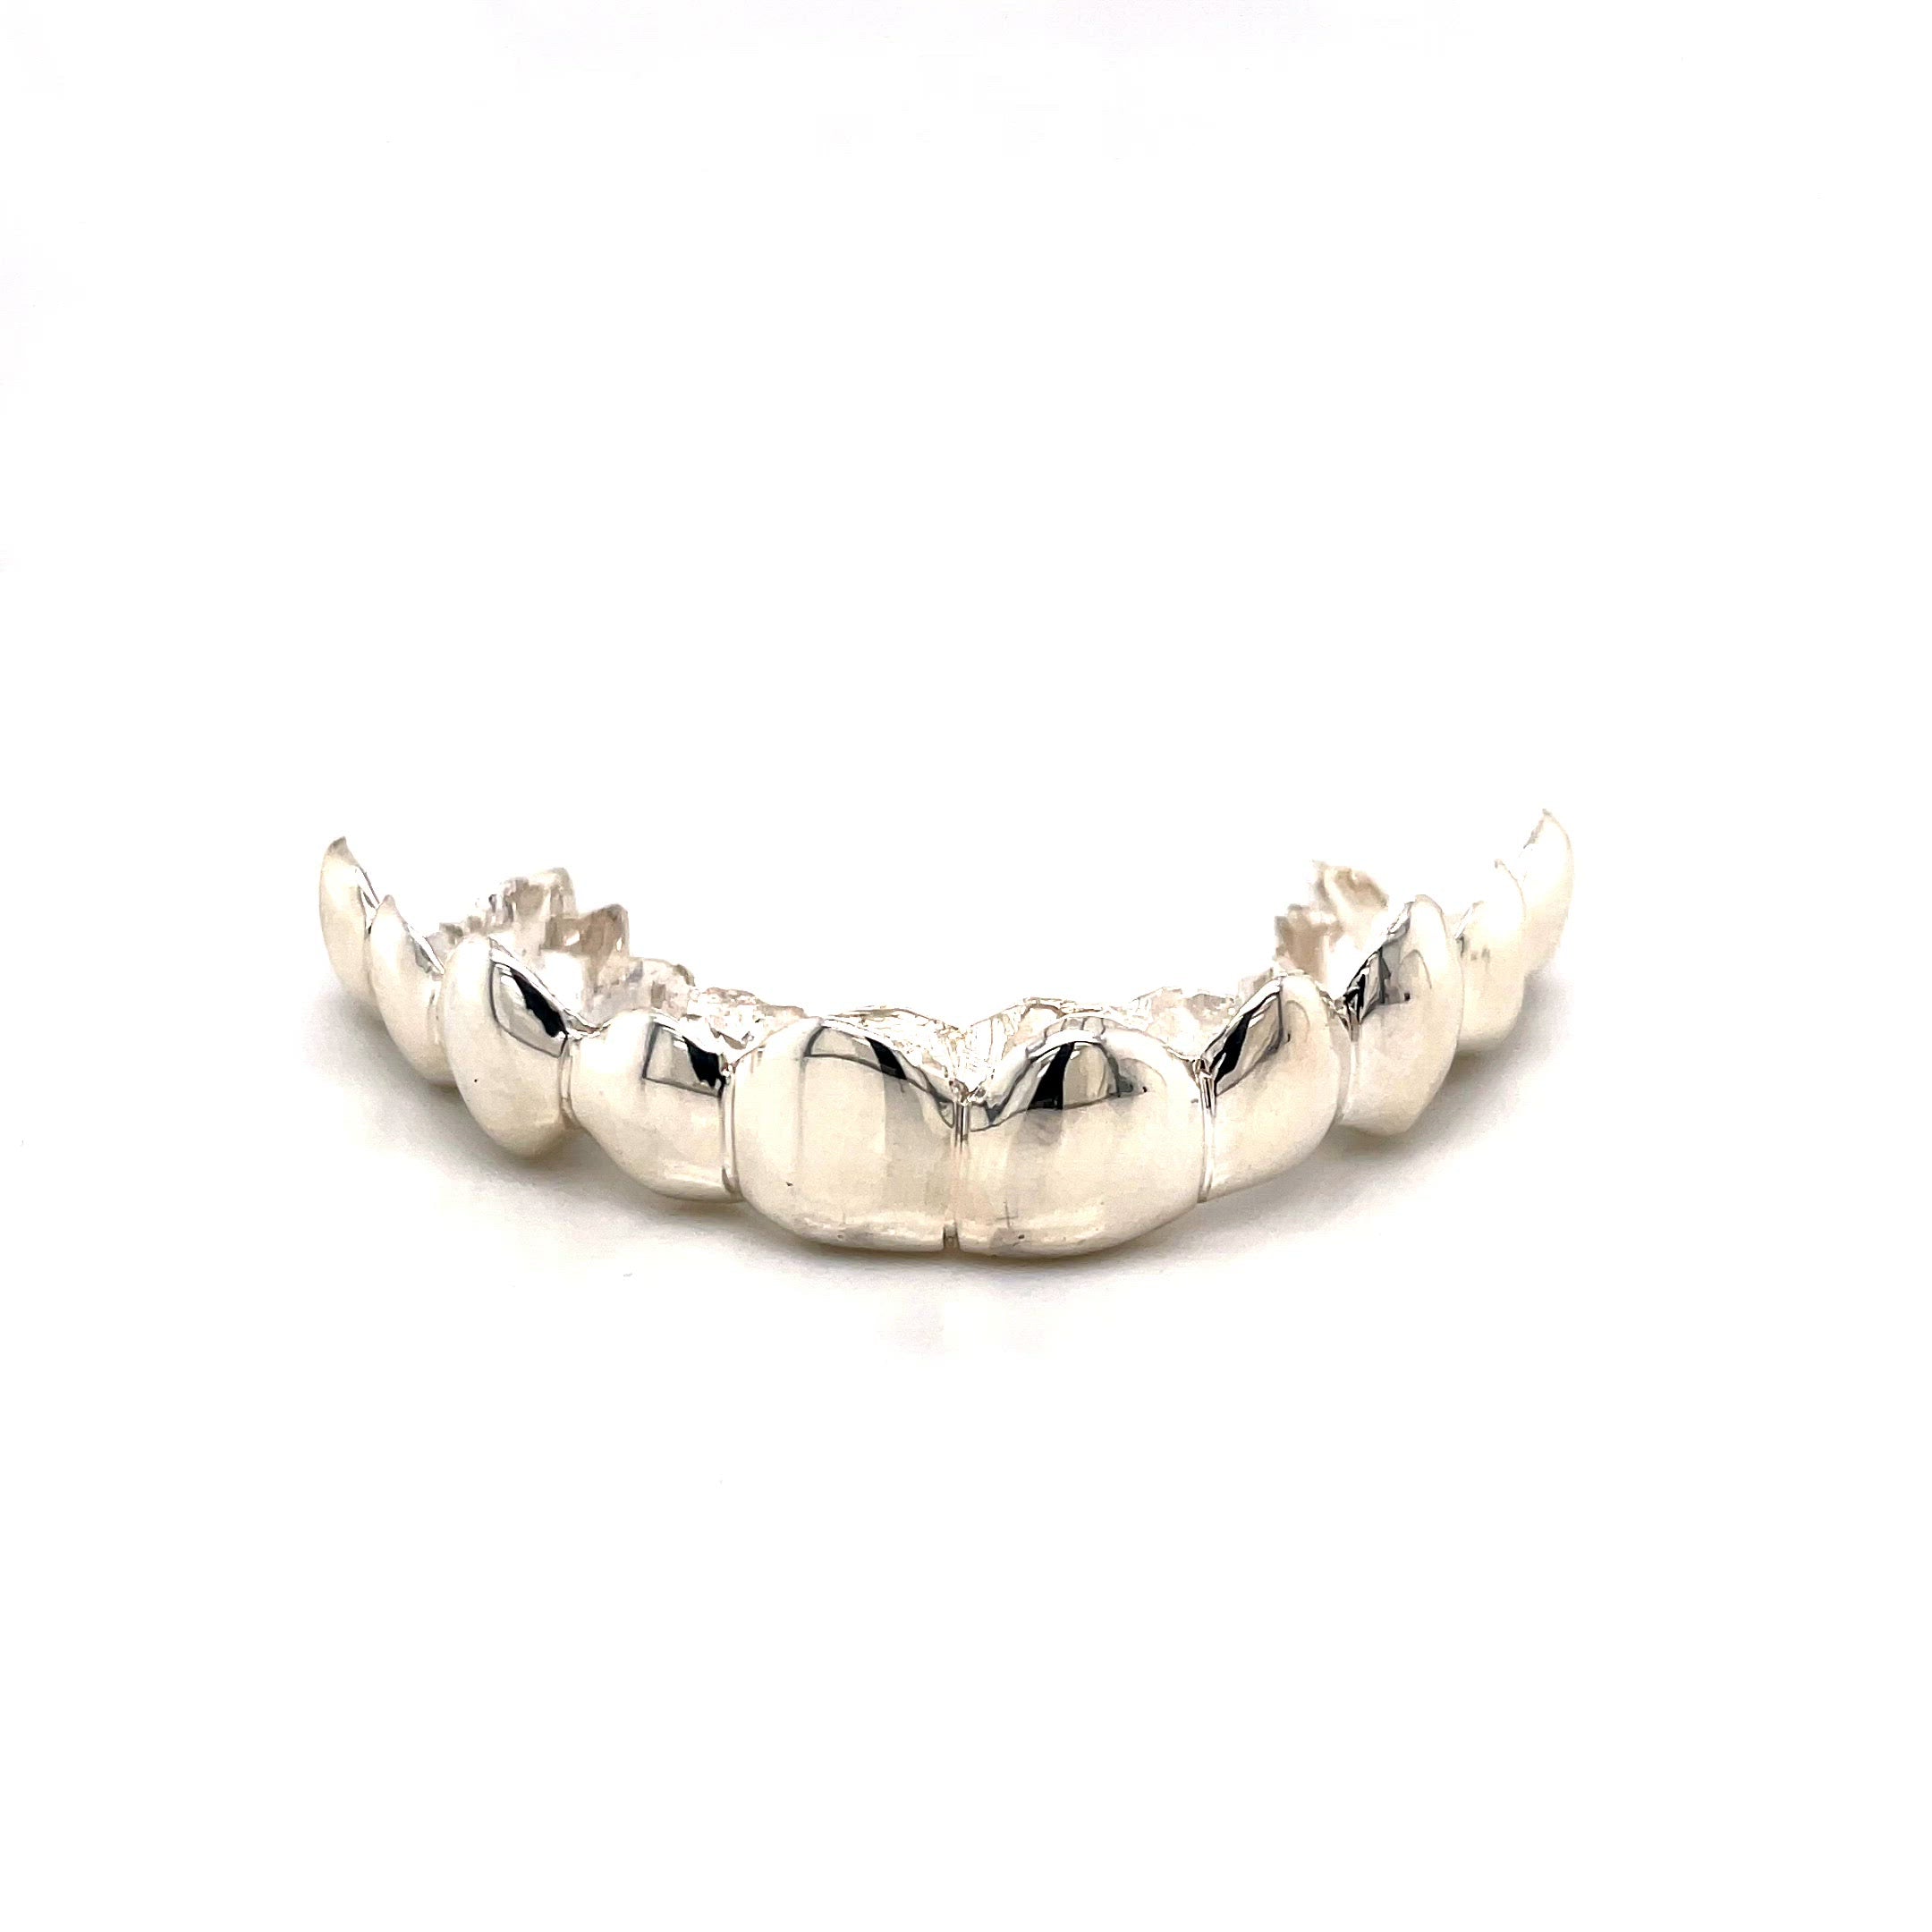 1pc Silver Cheese Grater Grillz